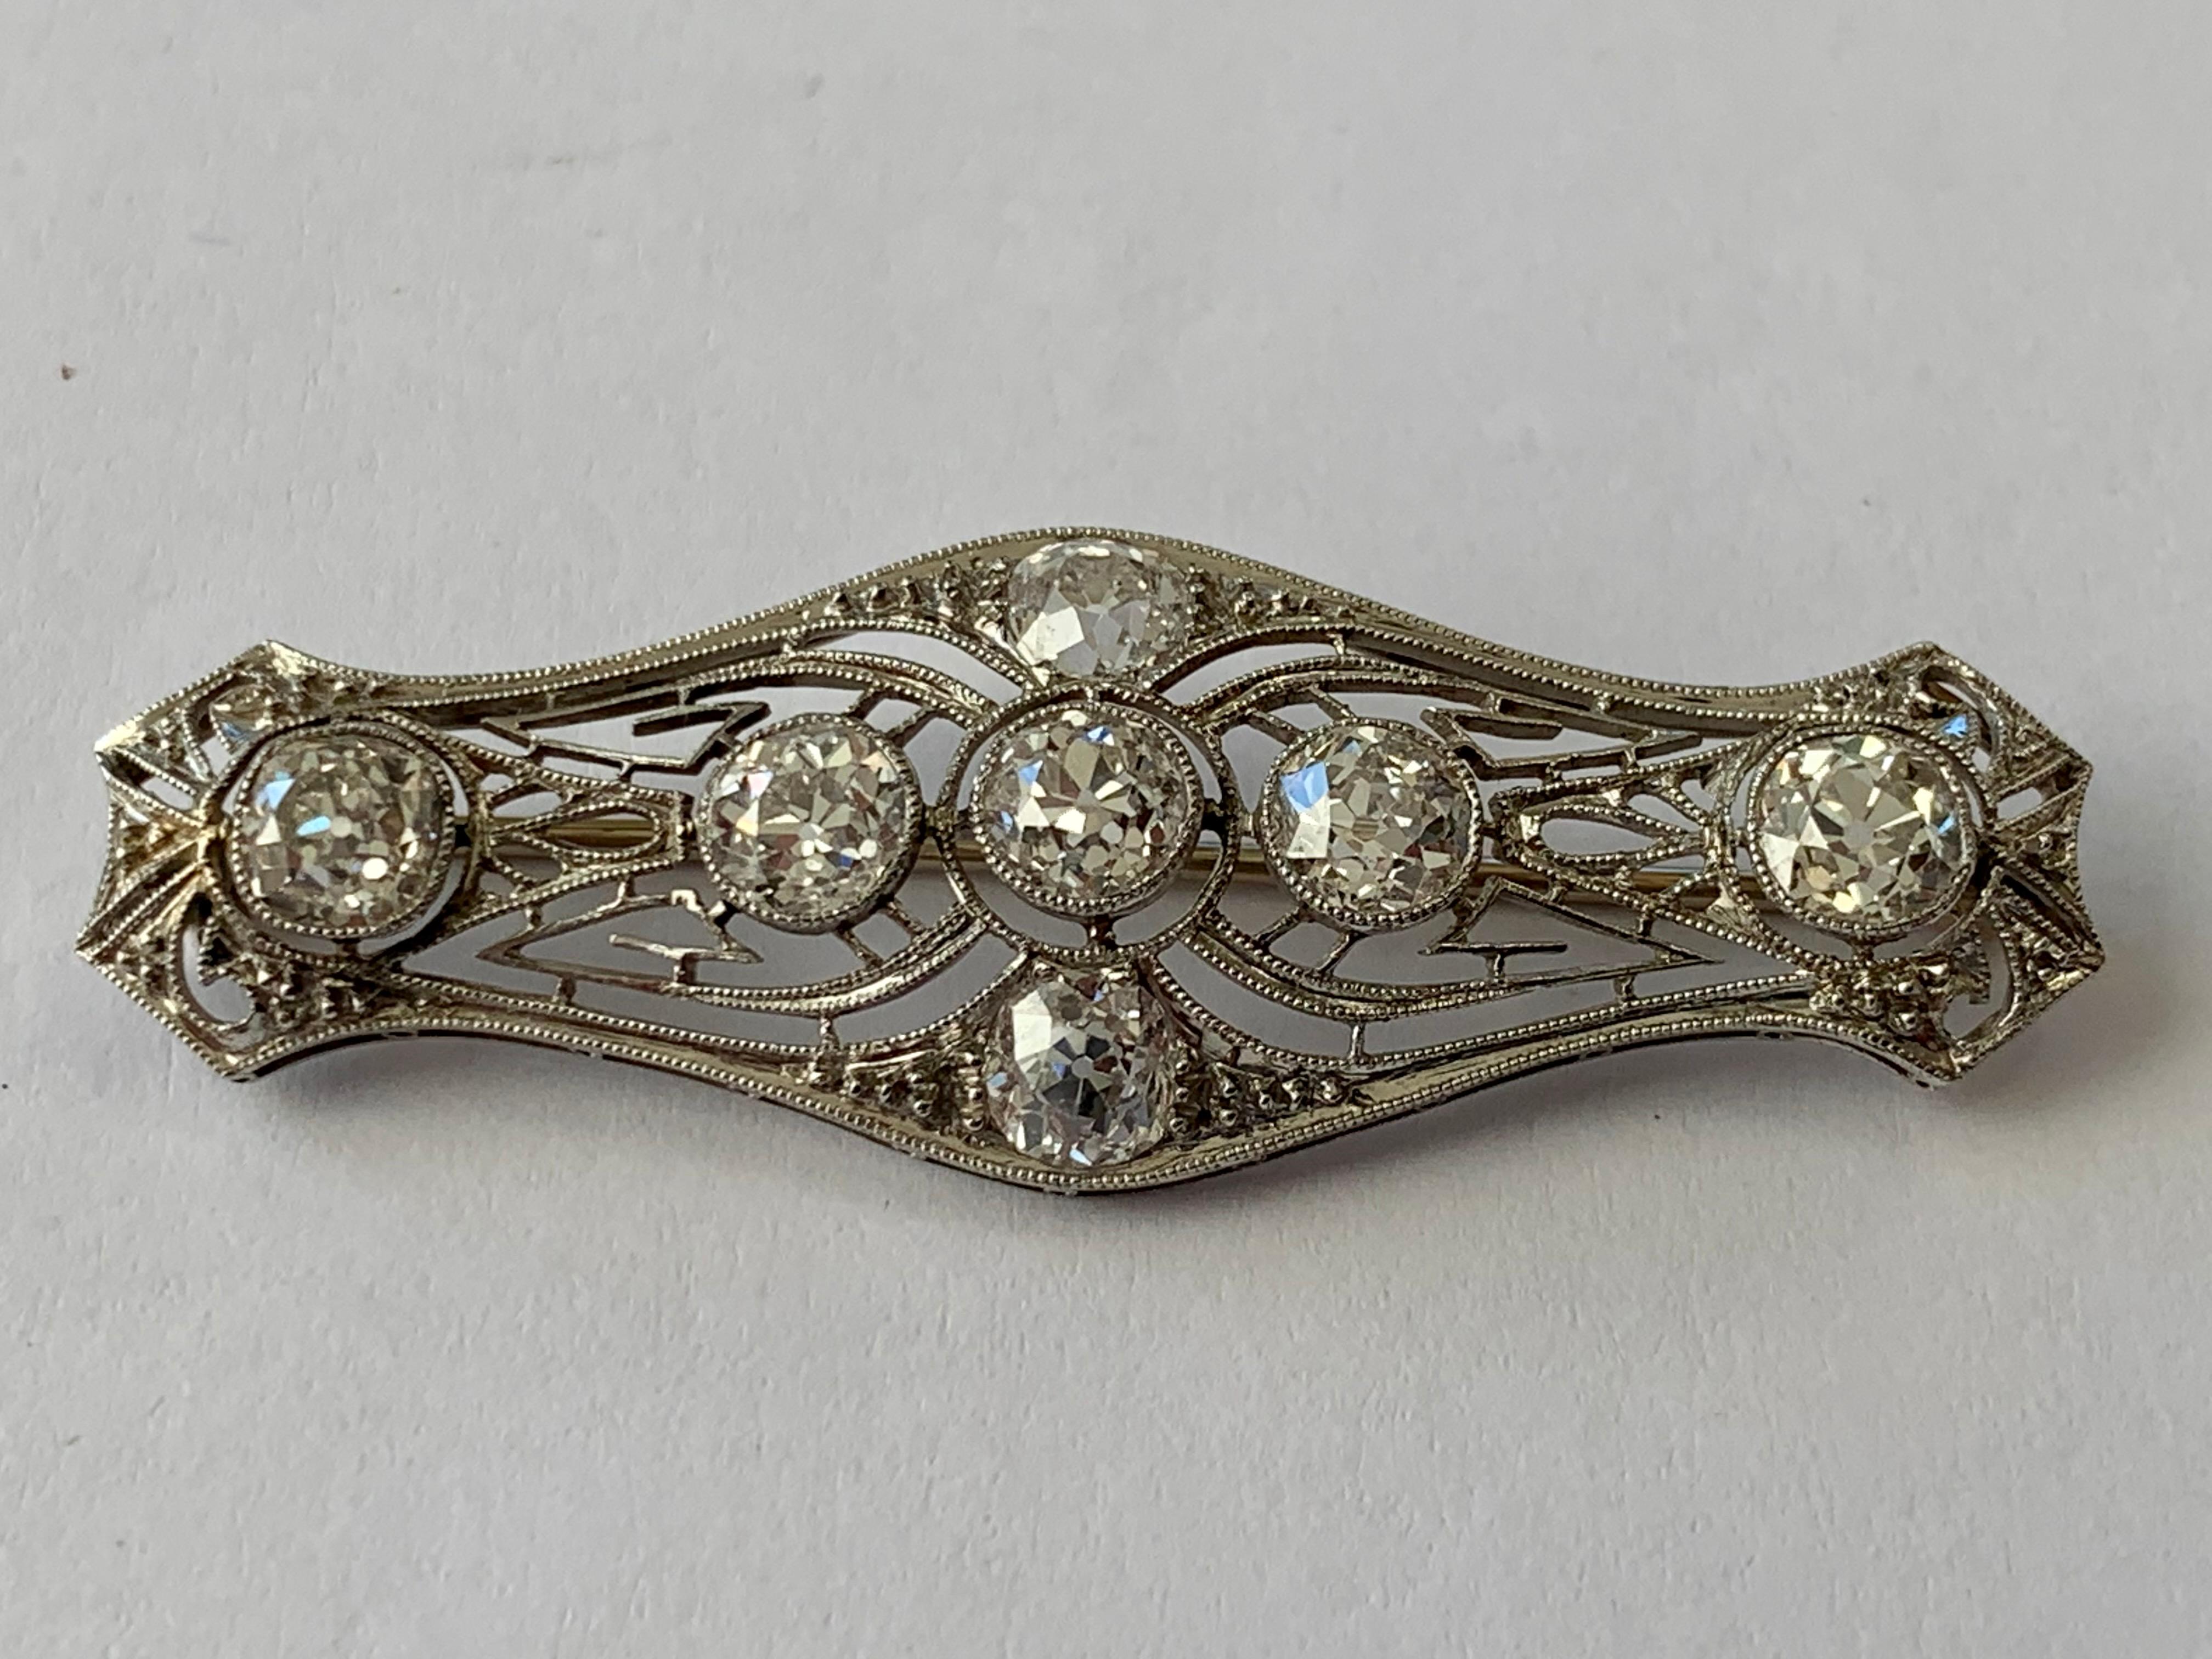 Very decorative openwork brooch mounted in fine Platinum and set 7 old European round cut Diamonds weighing approximately 2.50 ct. Finished with fine millegrain on the platinum edges. Length: 5 cm
Beautifully hand crafted platinum Diamond Brooch